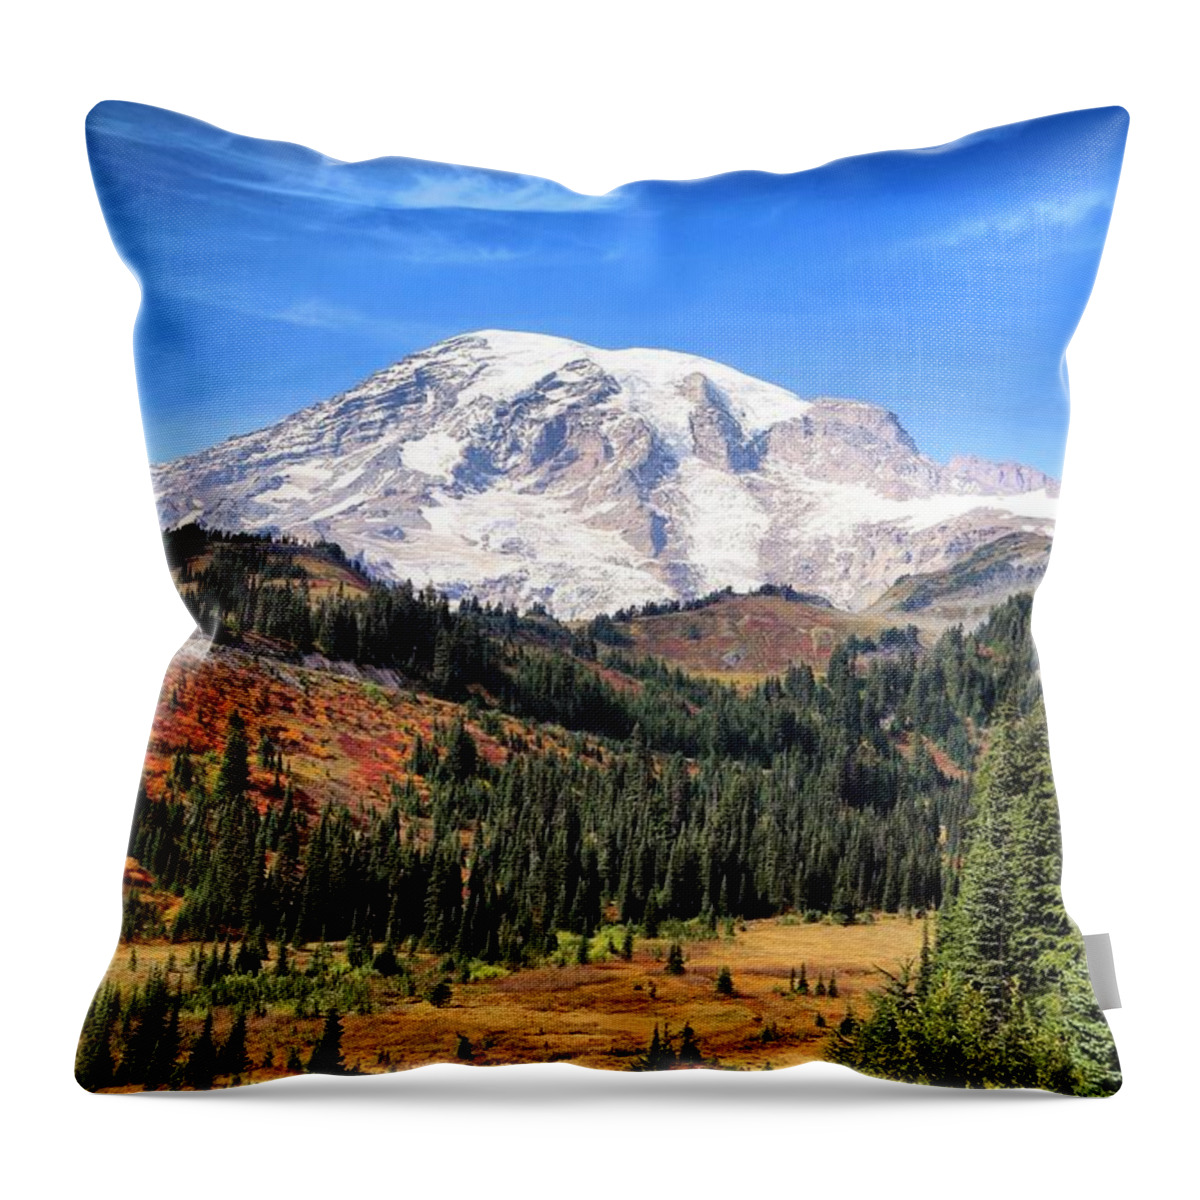 Leaving Paradise Throw Pillow featuring the photograph Leaving Paradise by Lynn Hopwood